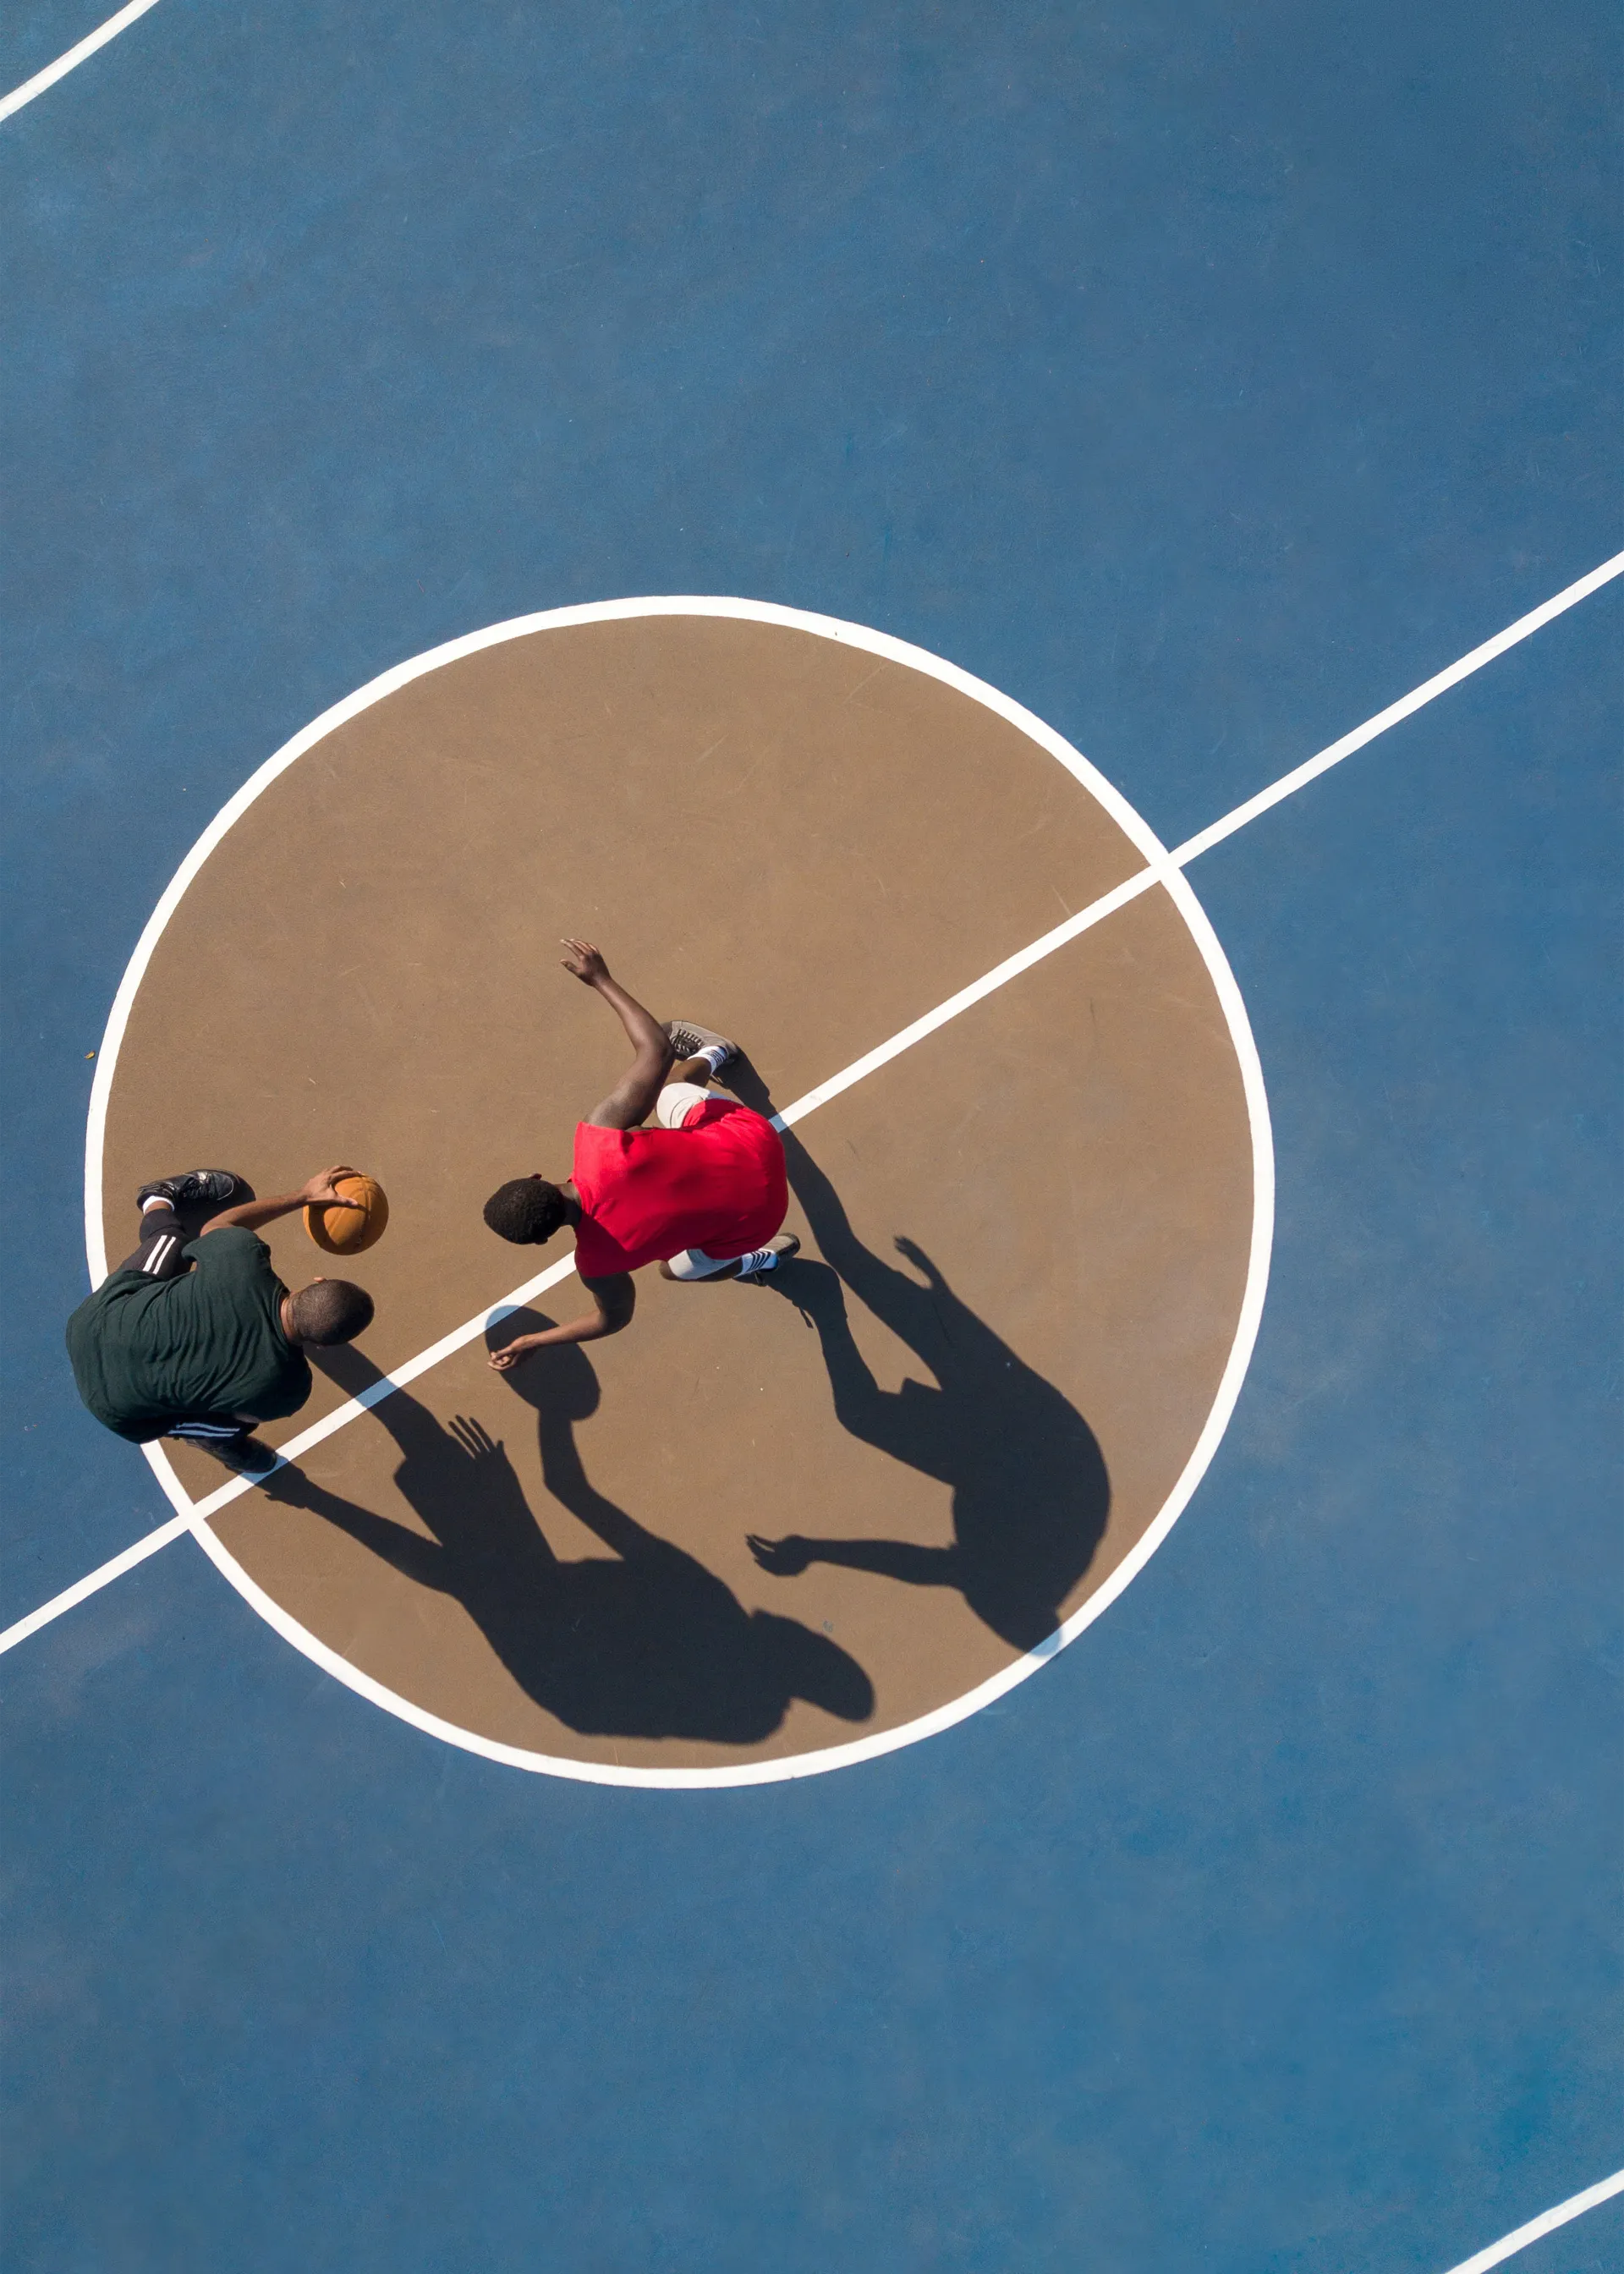 An aerial view of two basketball players on an outdoor court.